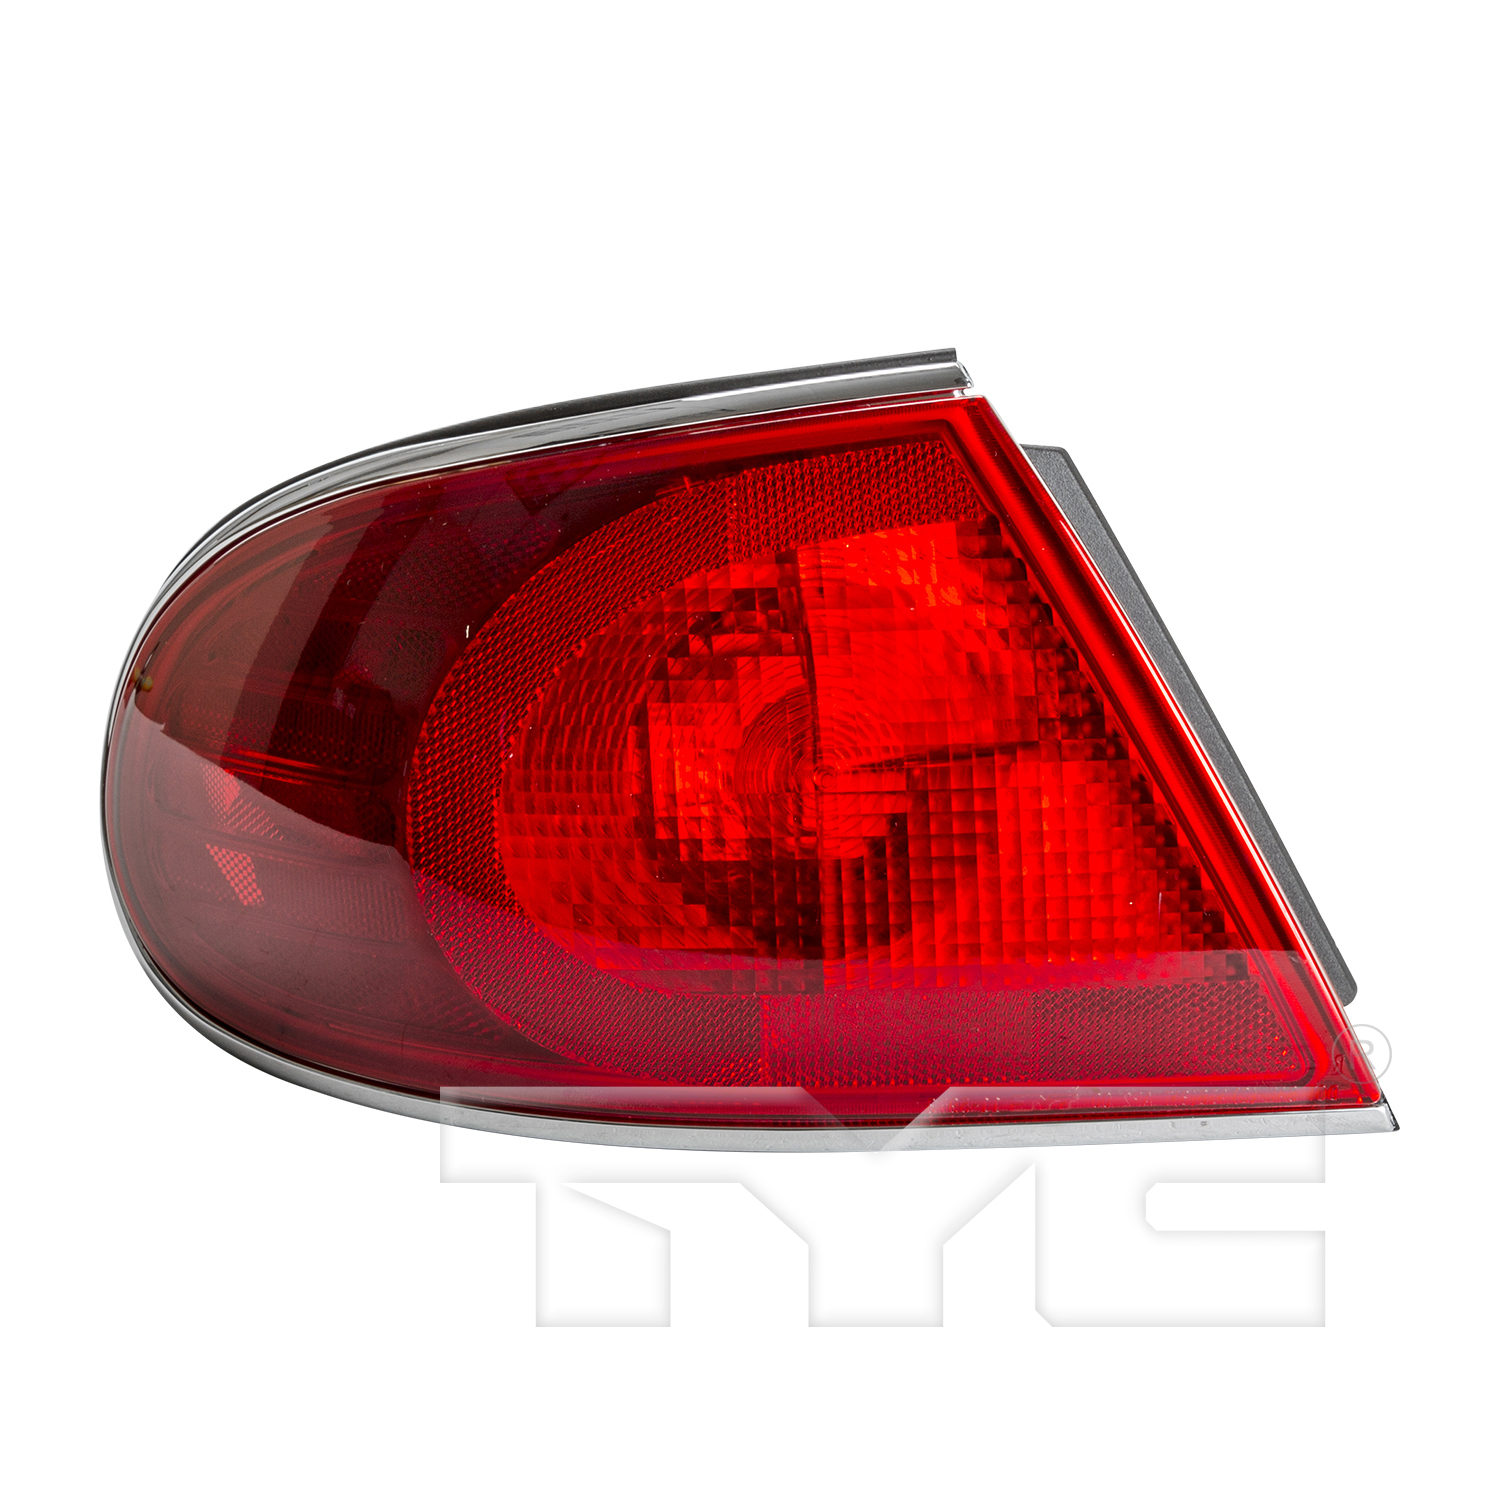 Aftermarket TAILLIGHTS for BUICK - LESABRE, LESABRE,01-05,LT Taillamp assy